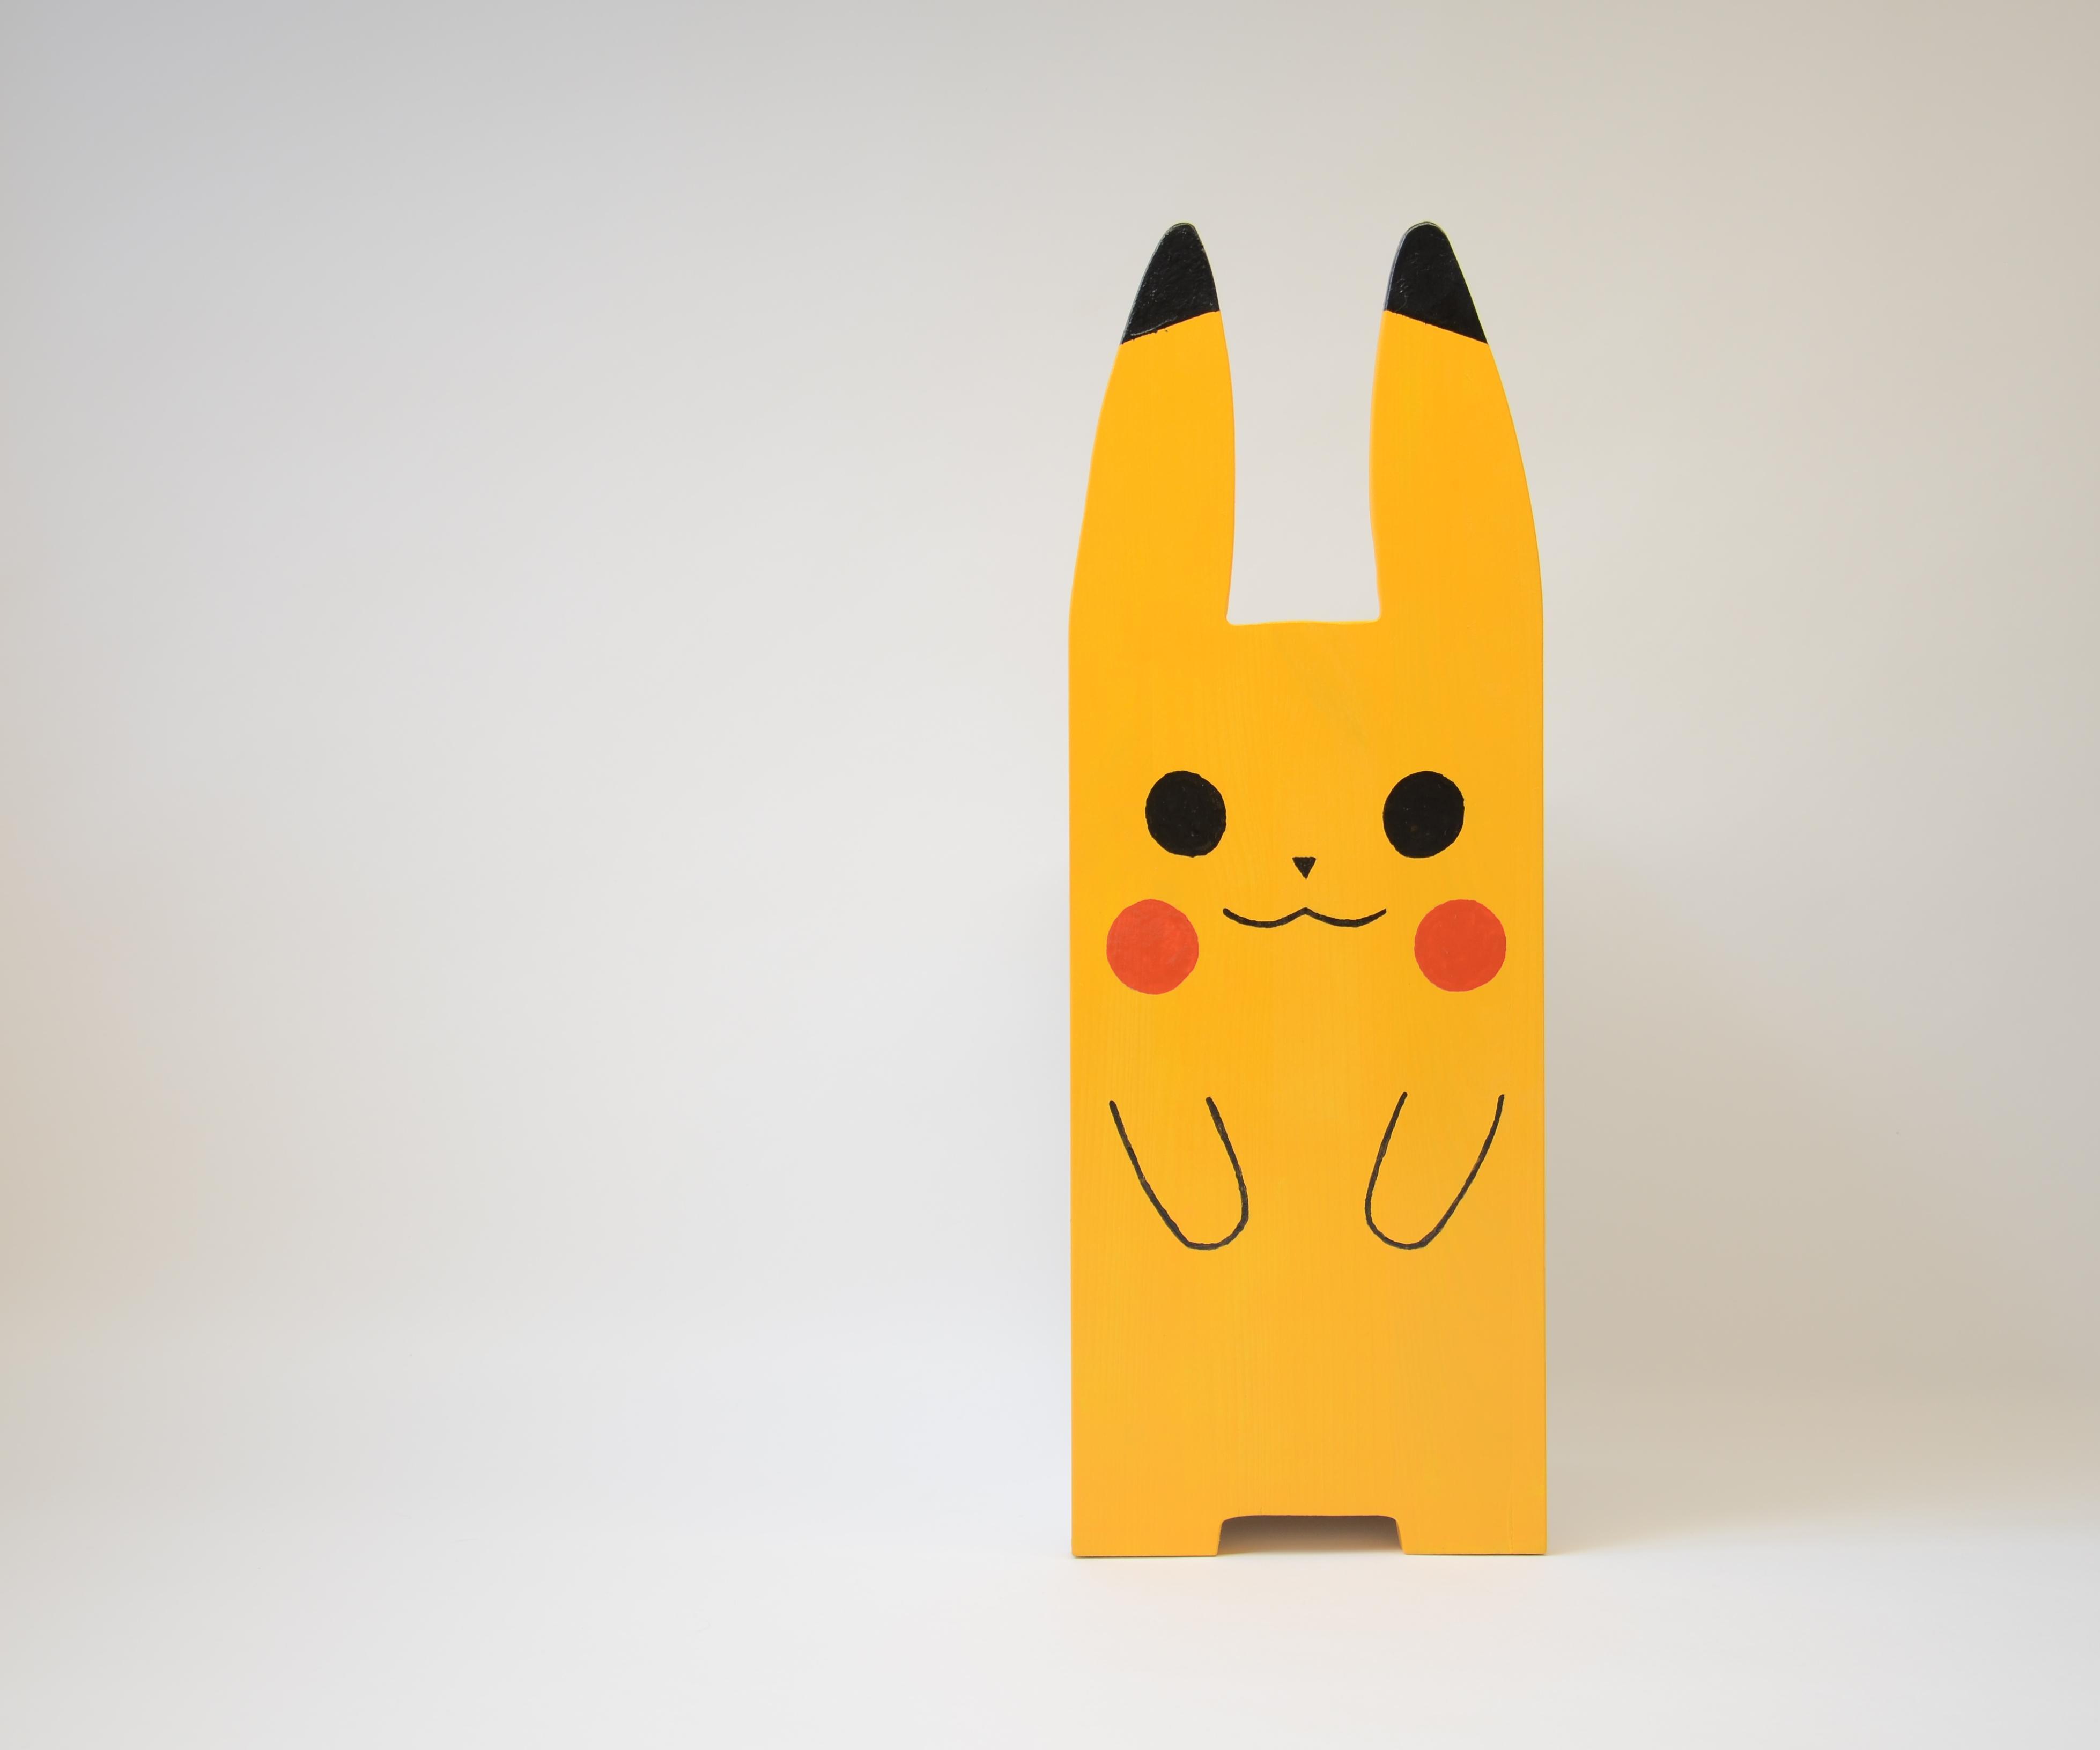 Pikachu Bedside Table - a Diy Furniture Project Inspired by Pokemon